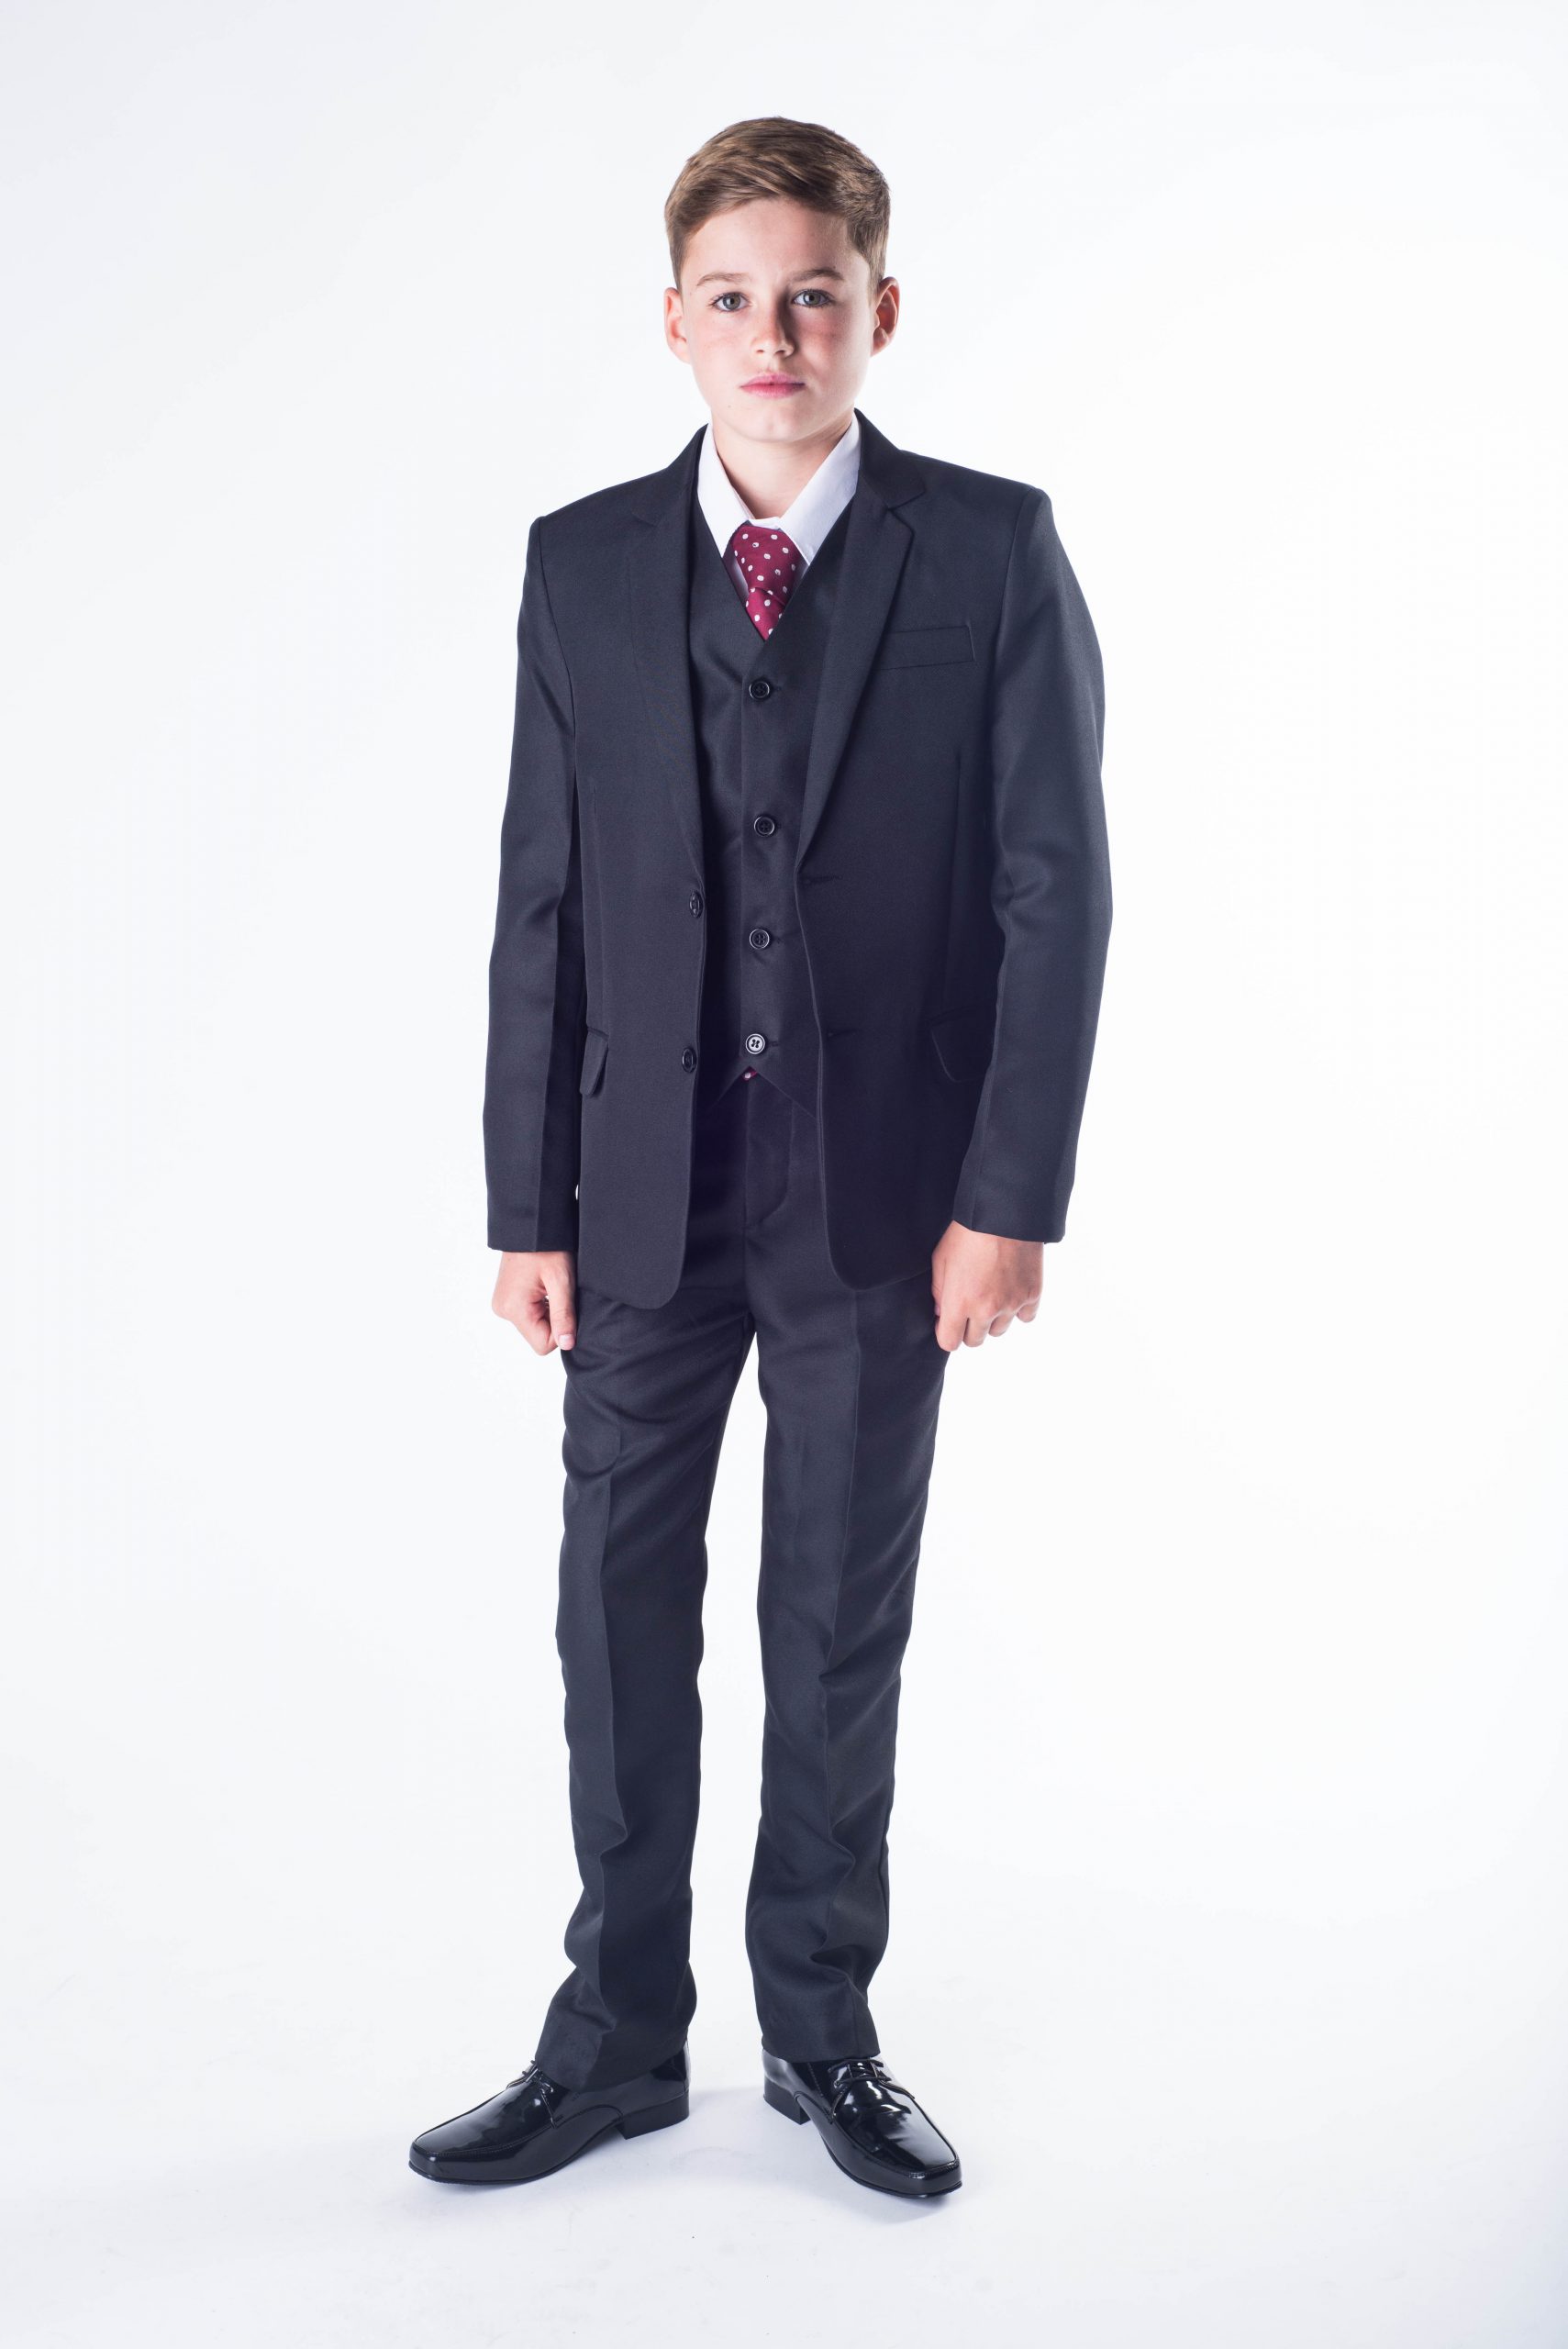 Boys Formal Wear Boys Suits Boys Black Suit Boys Wedding Suit Page Boy  Party Prom Suit From 74,45 € | DHgate